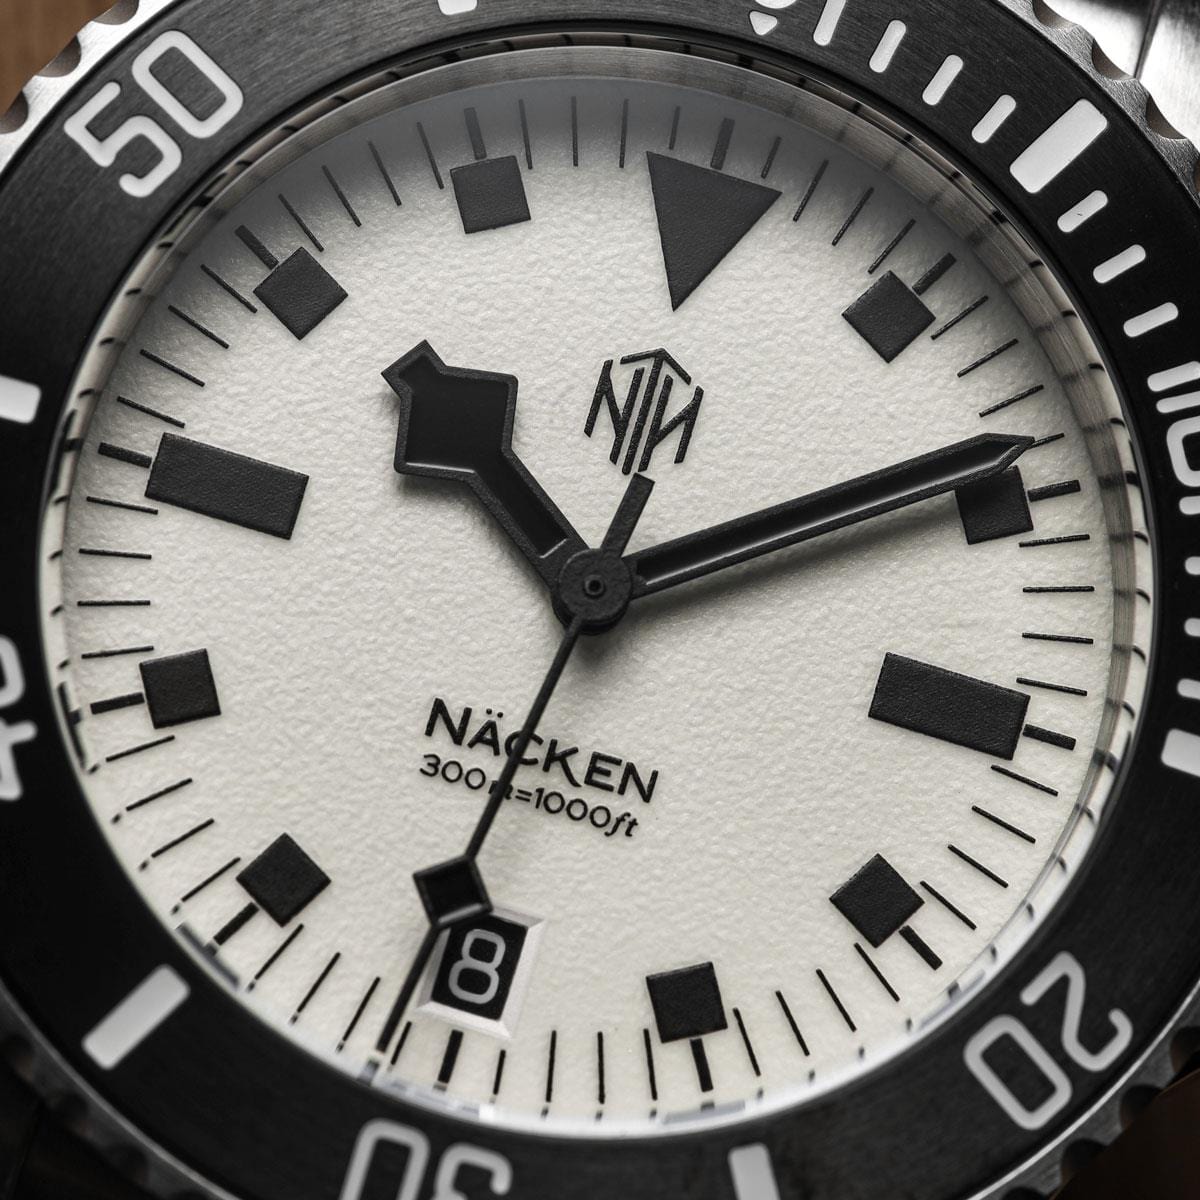 NTH Näcken Dive Watch - Vintage White Full Lume Dial - No Date - LIKE NEW